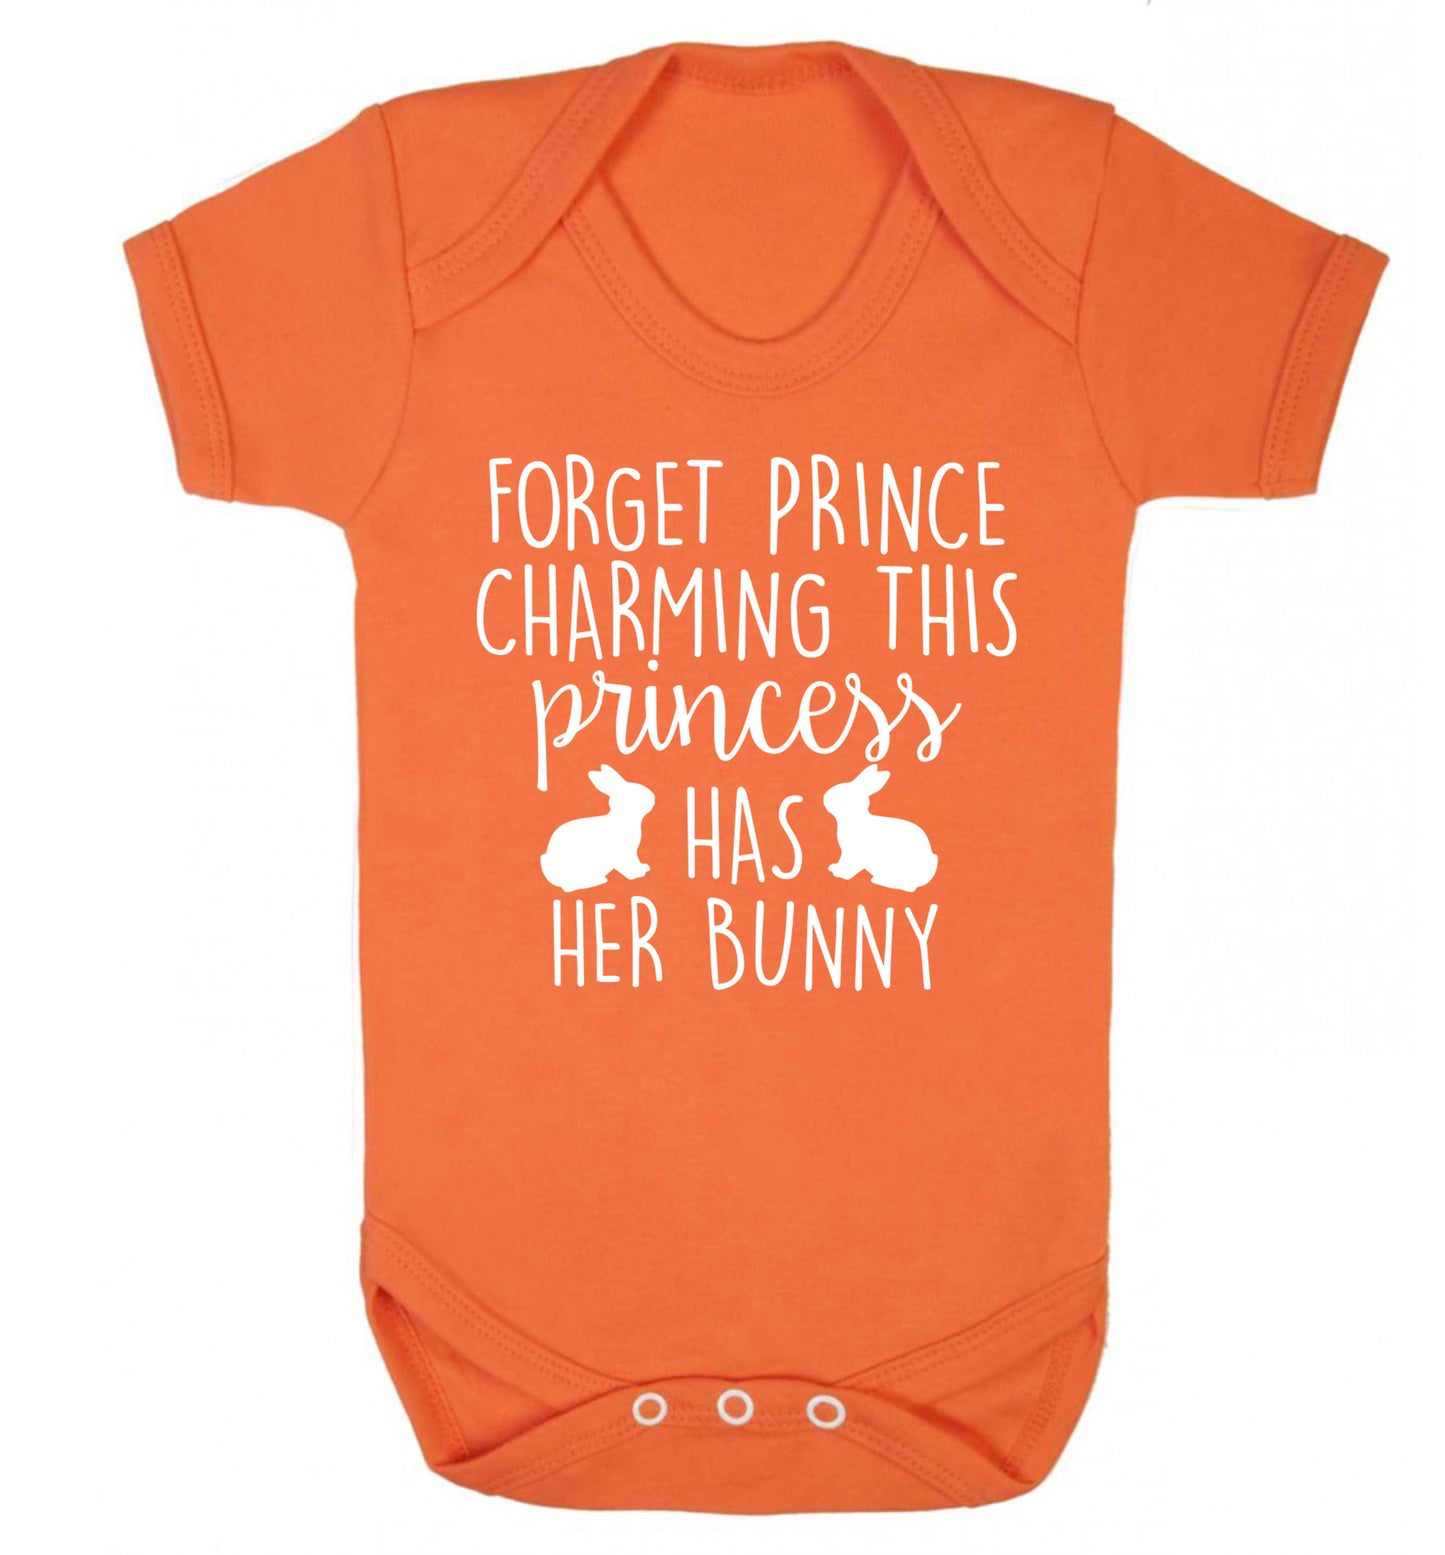 Forget prince charming this princess has her bunny Baby Vest orange 18-24 months